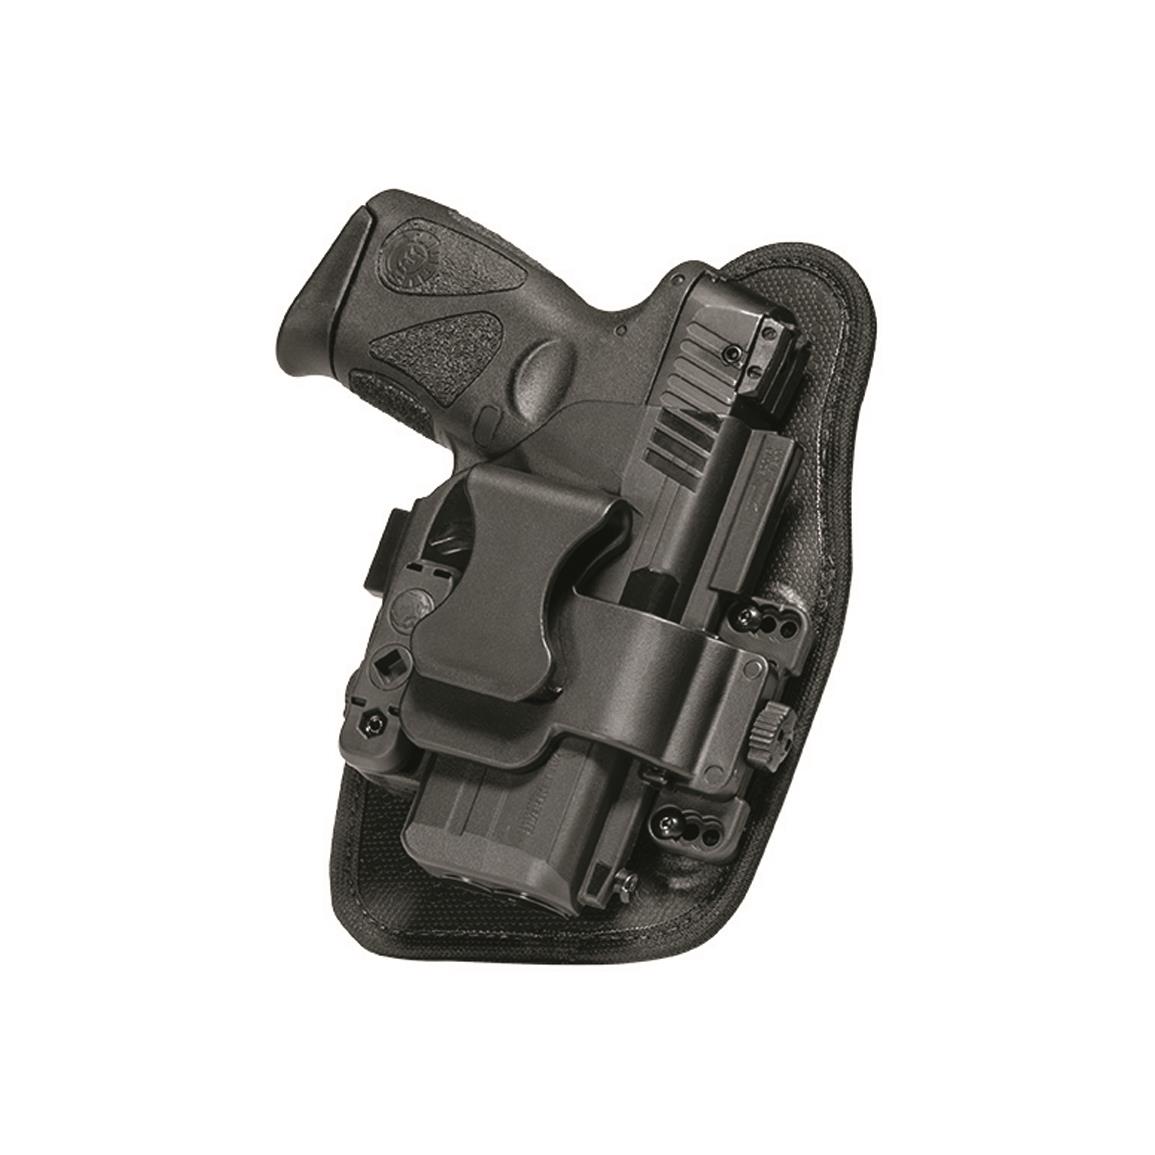 Alien Gear ShapeShift Appendix Carry Holster, Springfield XD-M 3.8" Compact Models